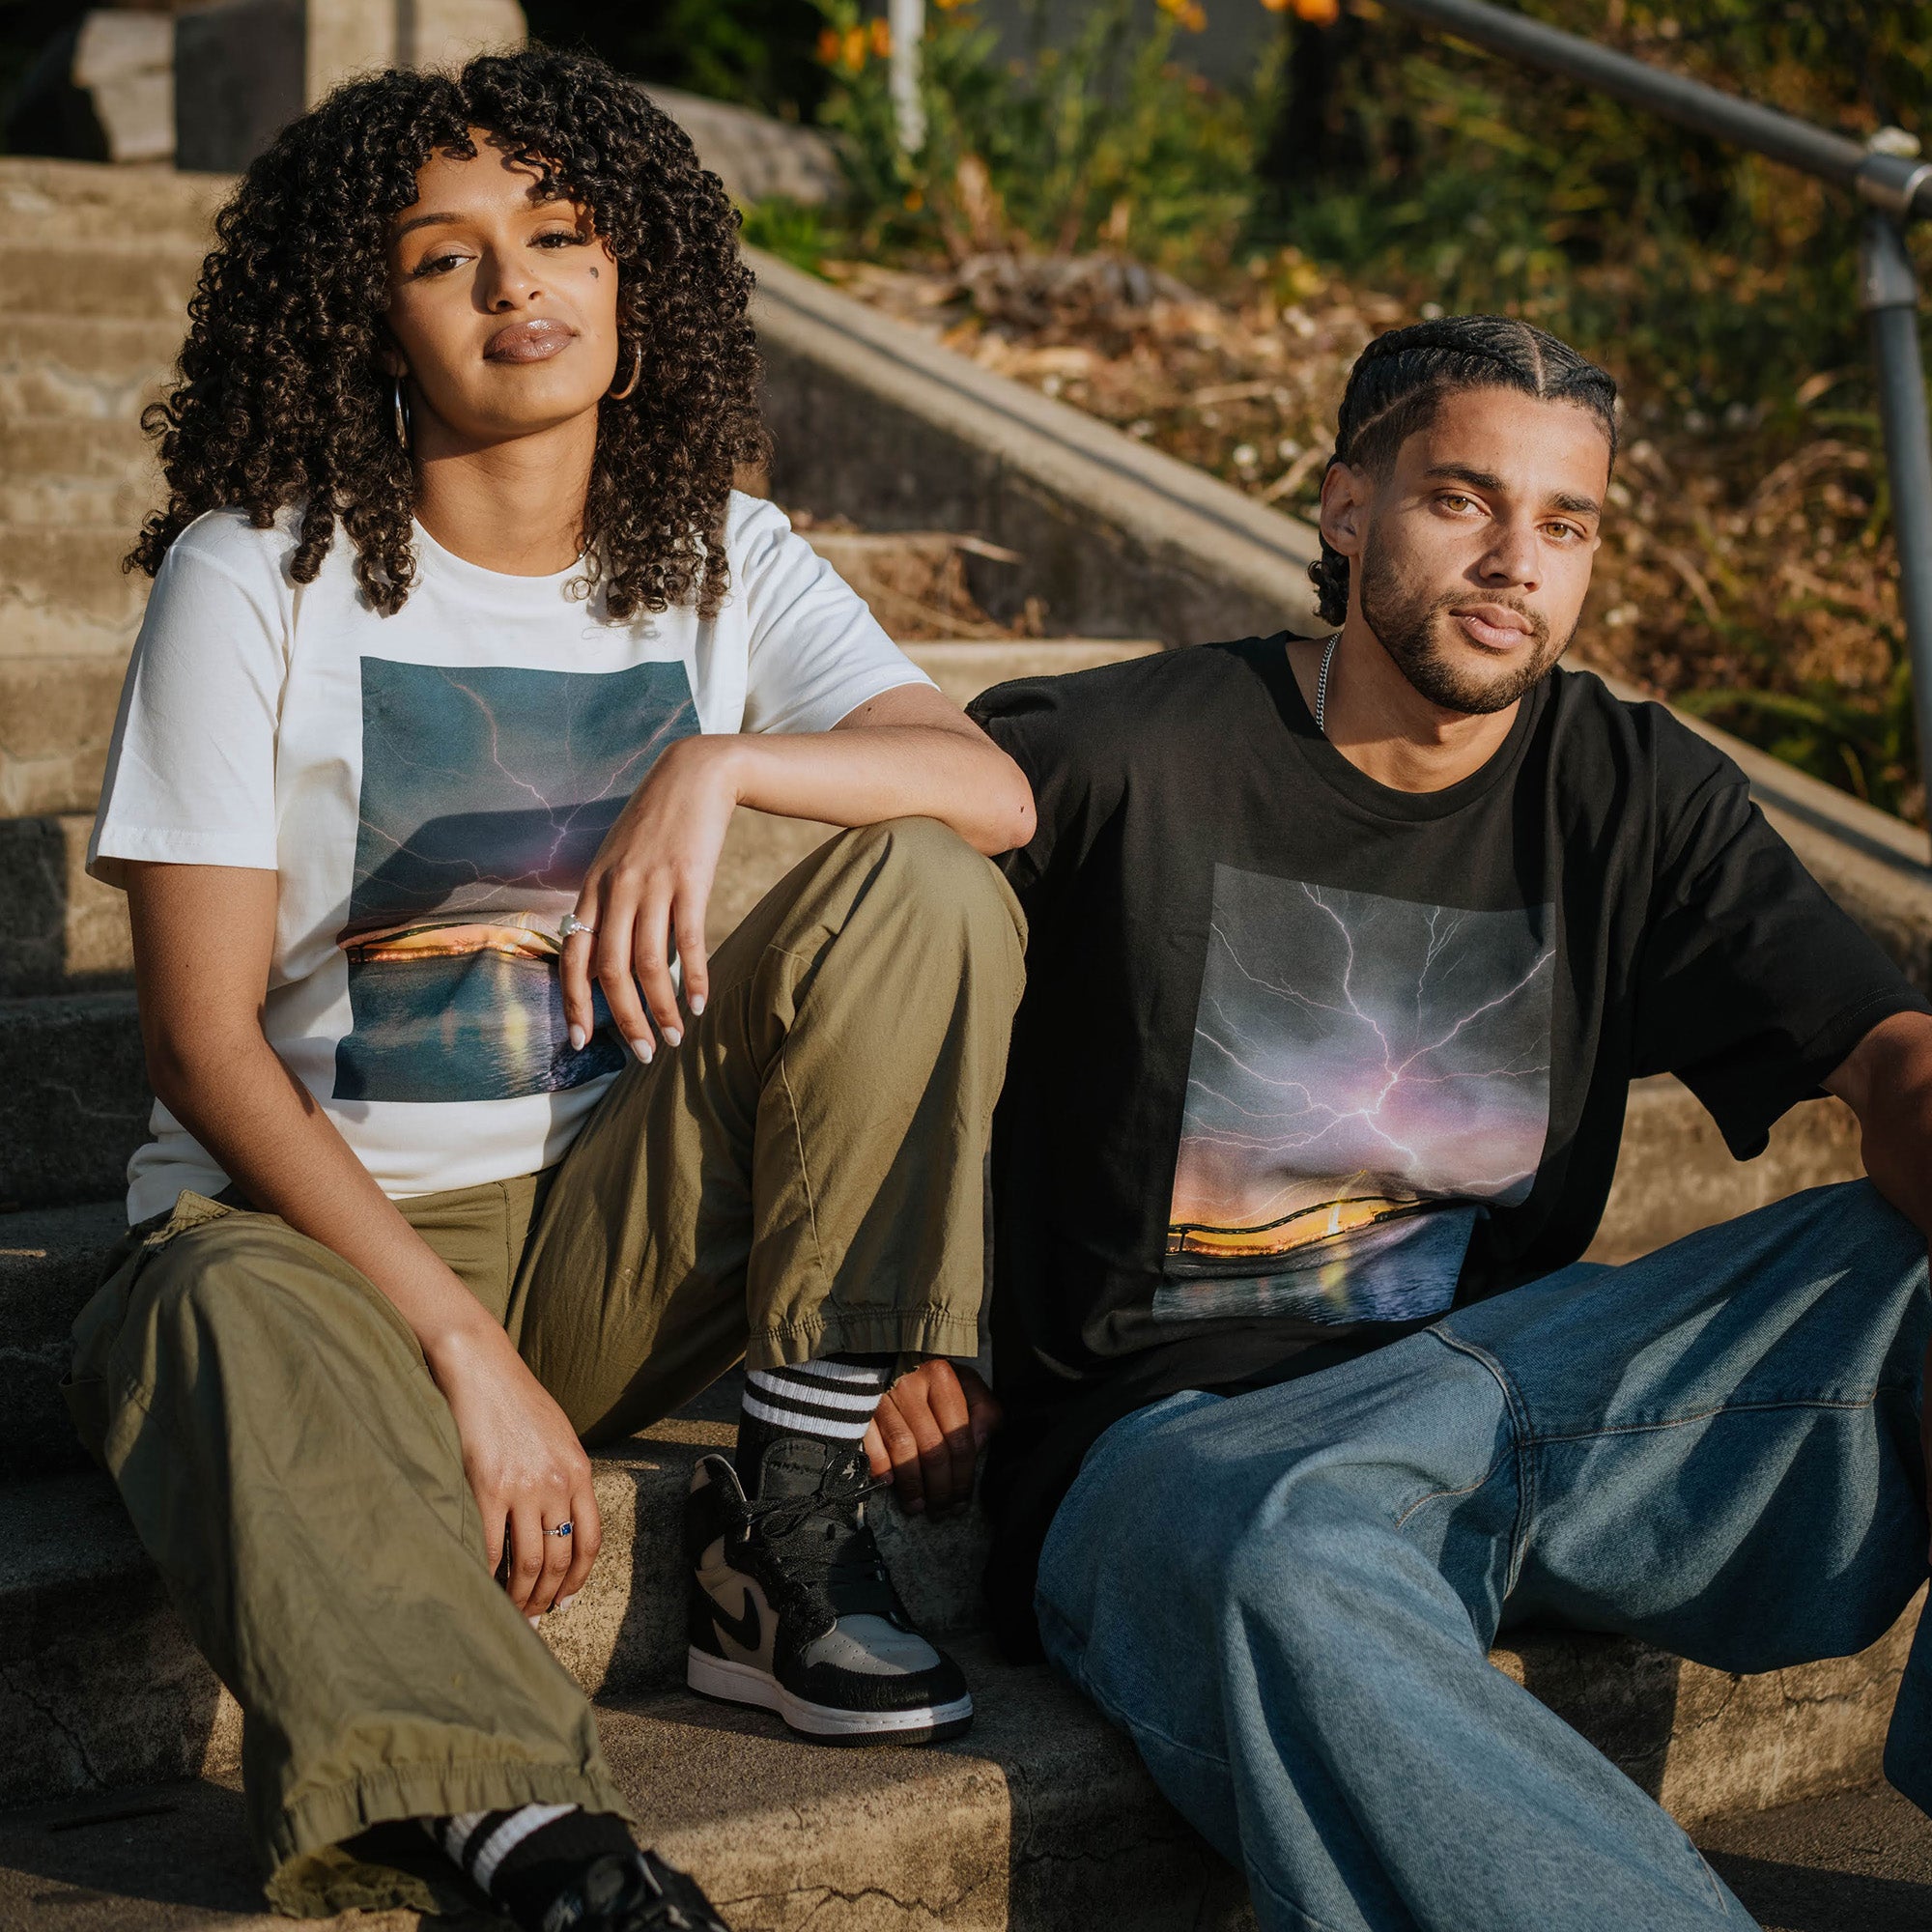 Female and Male model wearing t-shirts with image of lightening in Oakland by photographer Vincent James.